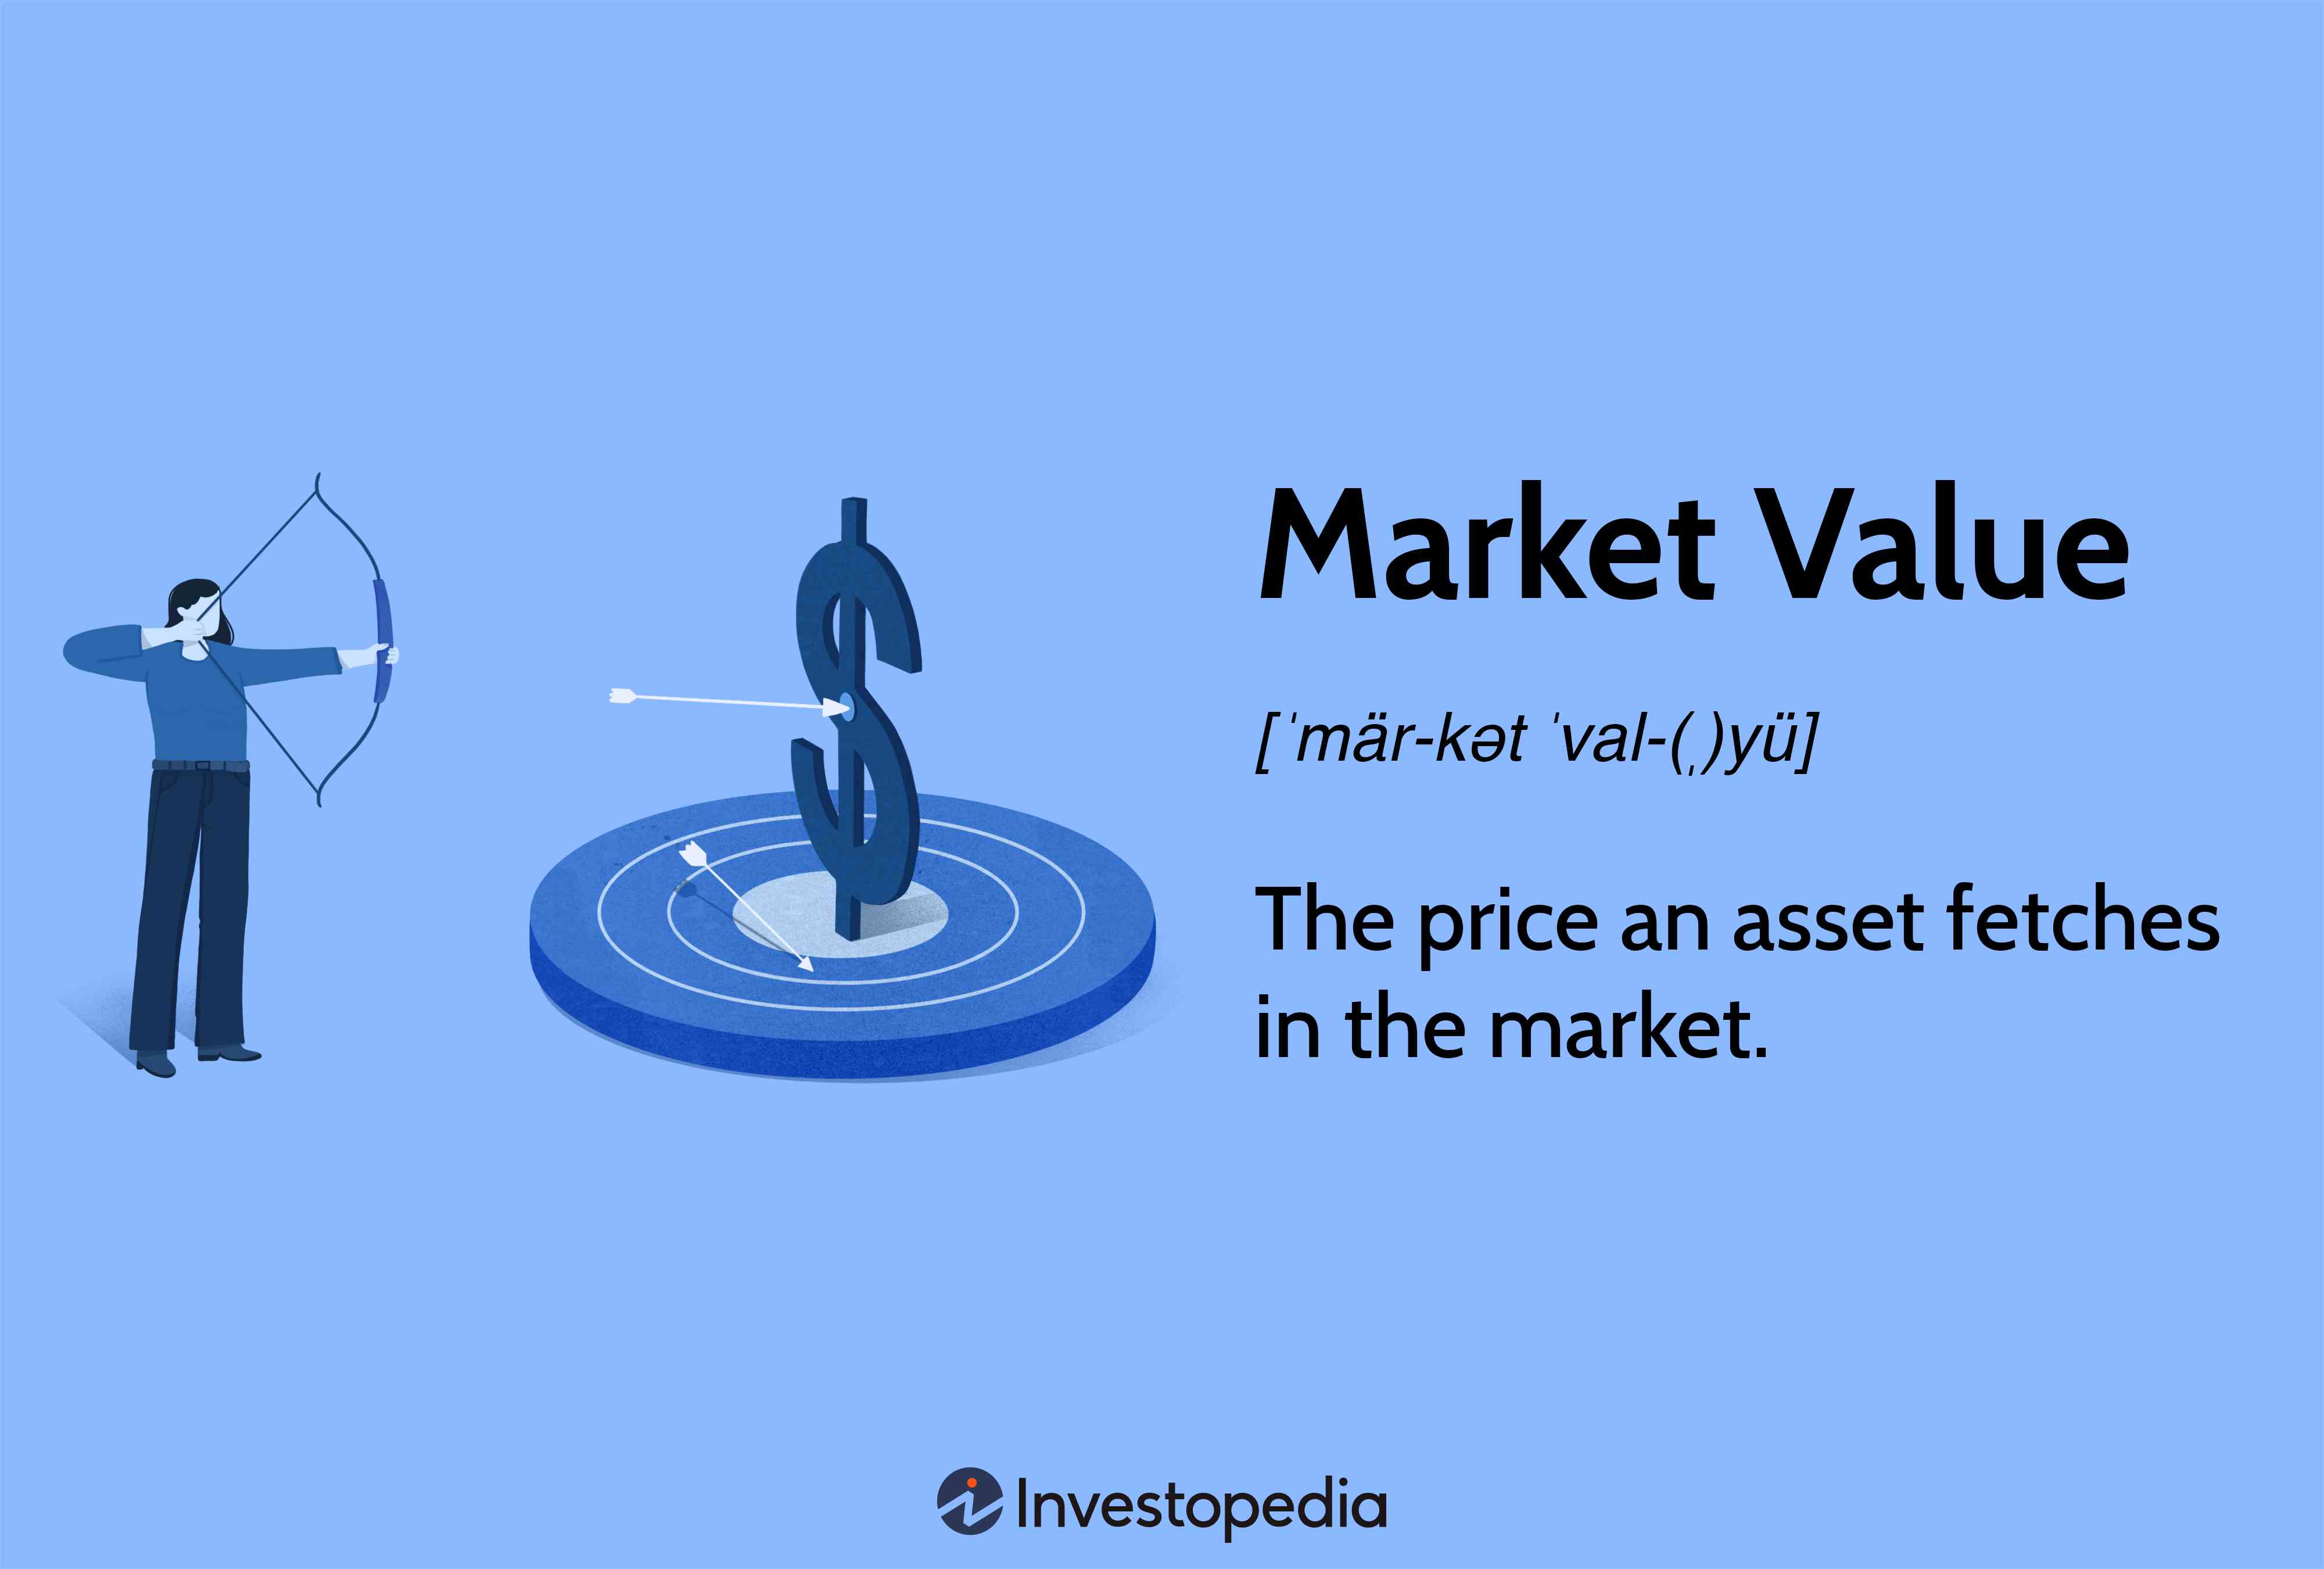 Market Value: The price an asset fetches in the market.